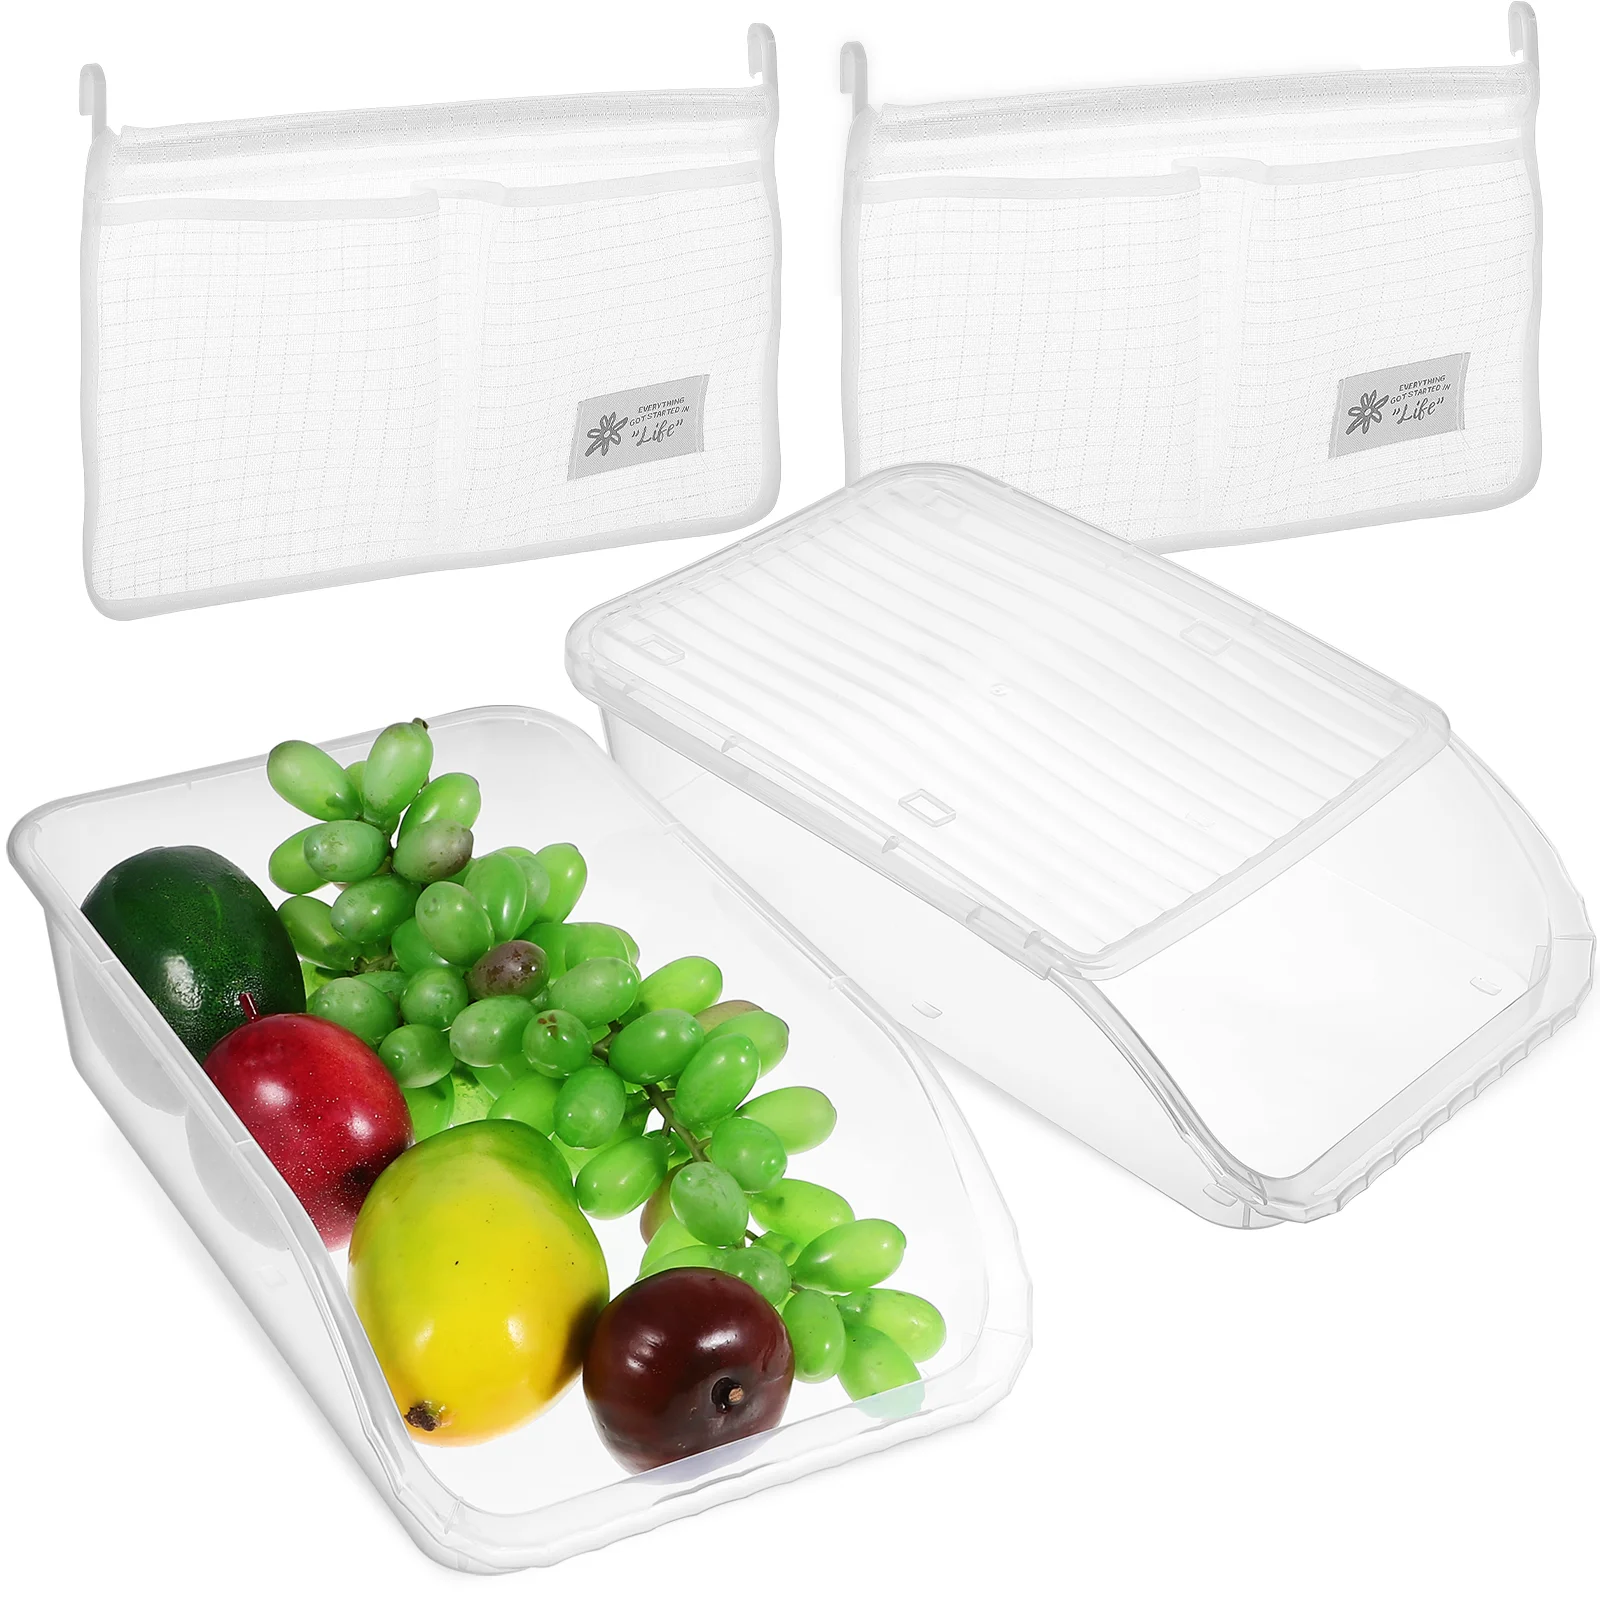 2Pcs Refrigerator Storage Boxes with Lid Kitchen Organizer Food Storage Container and 2 Mesh Bags